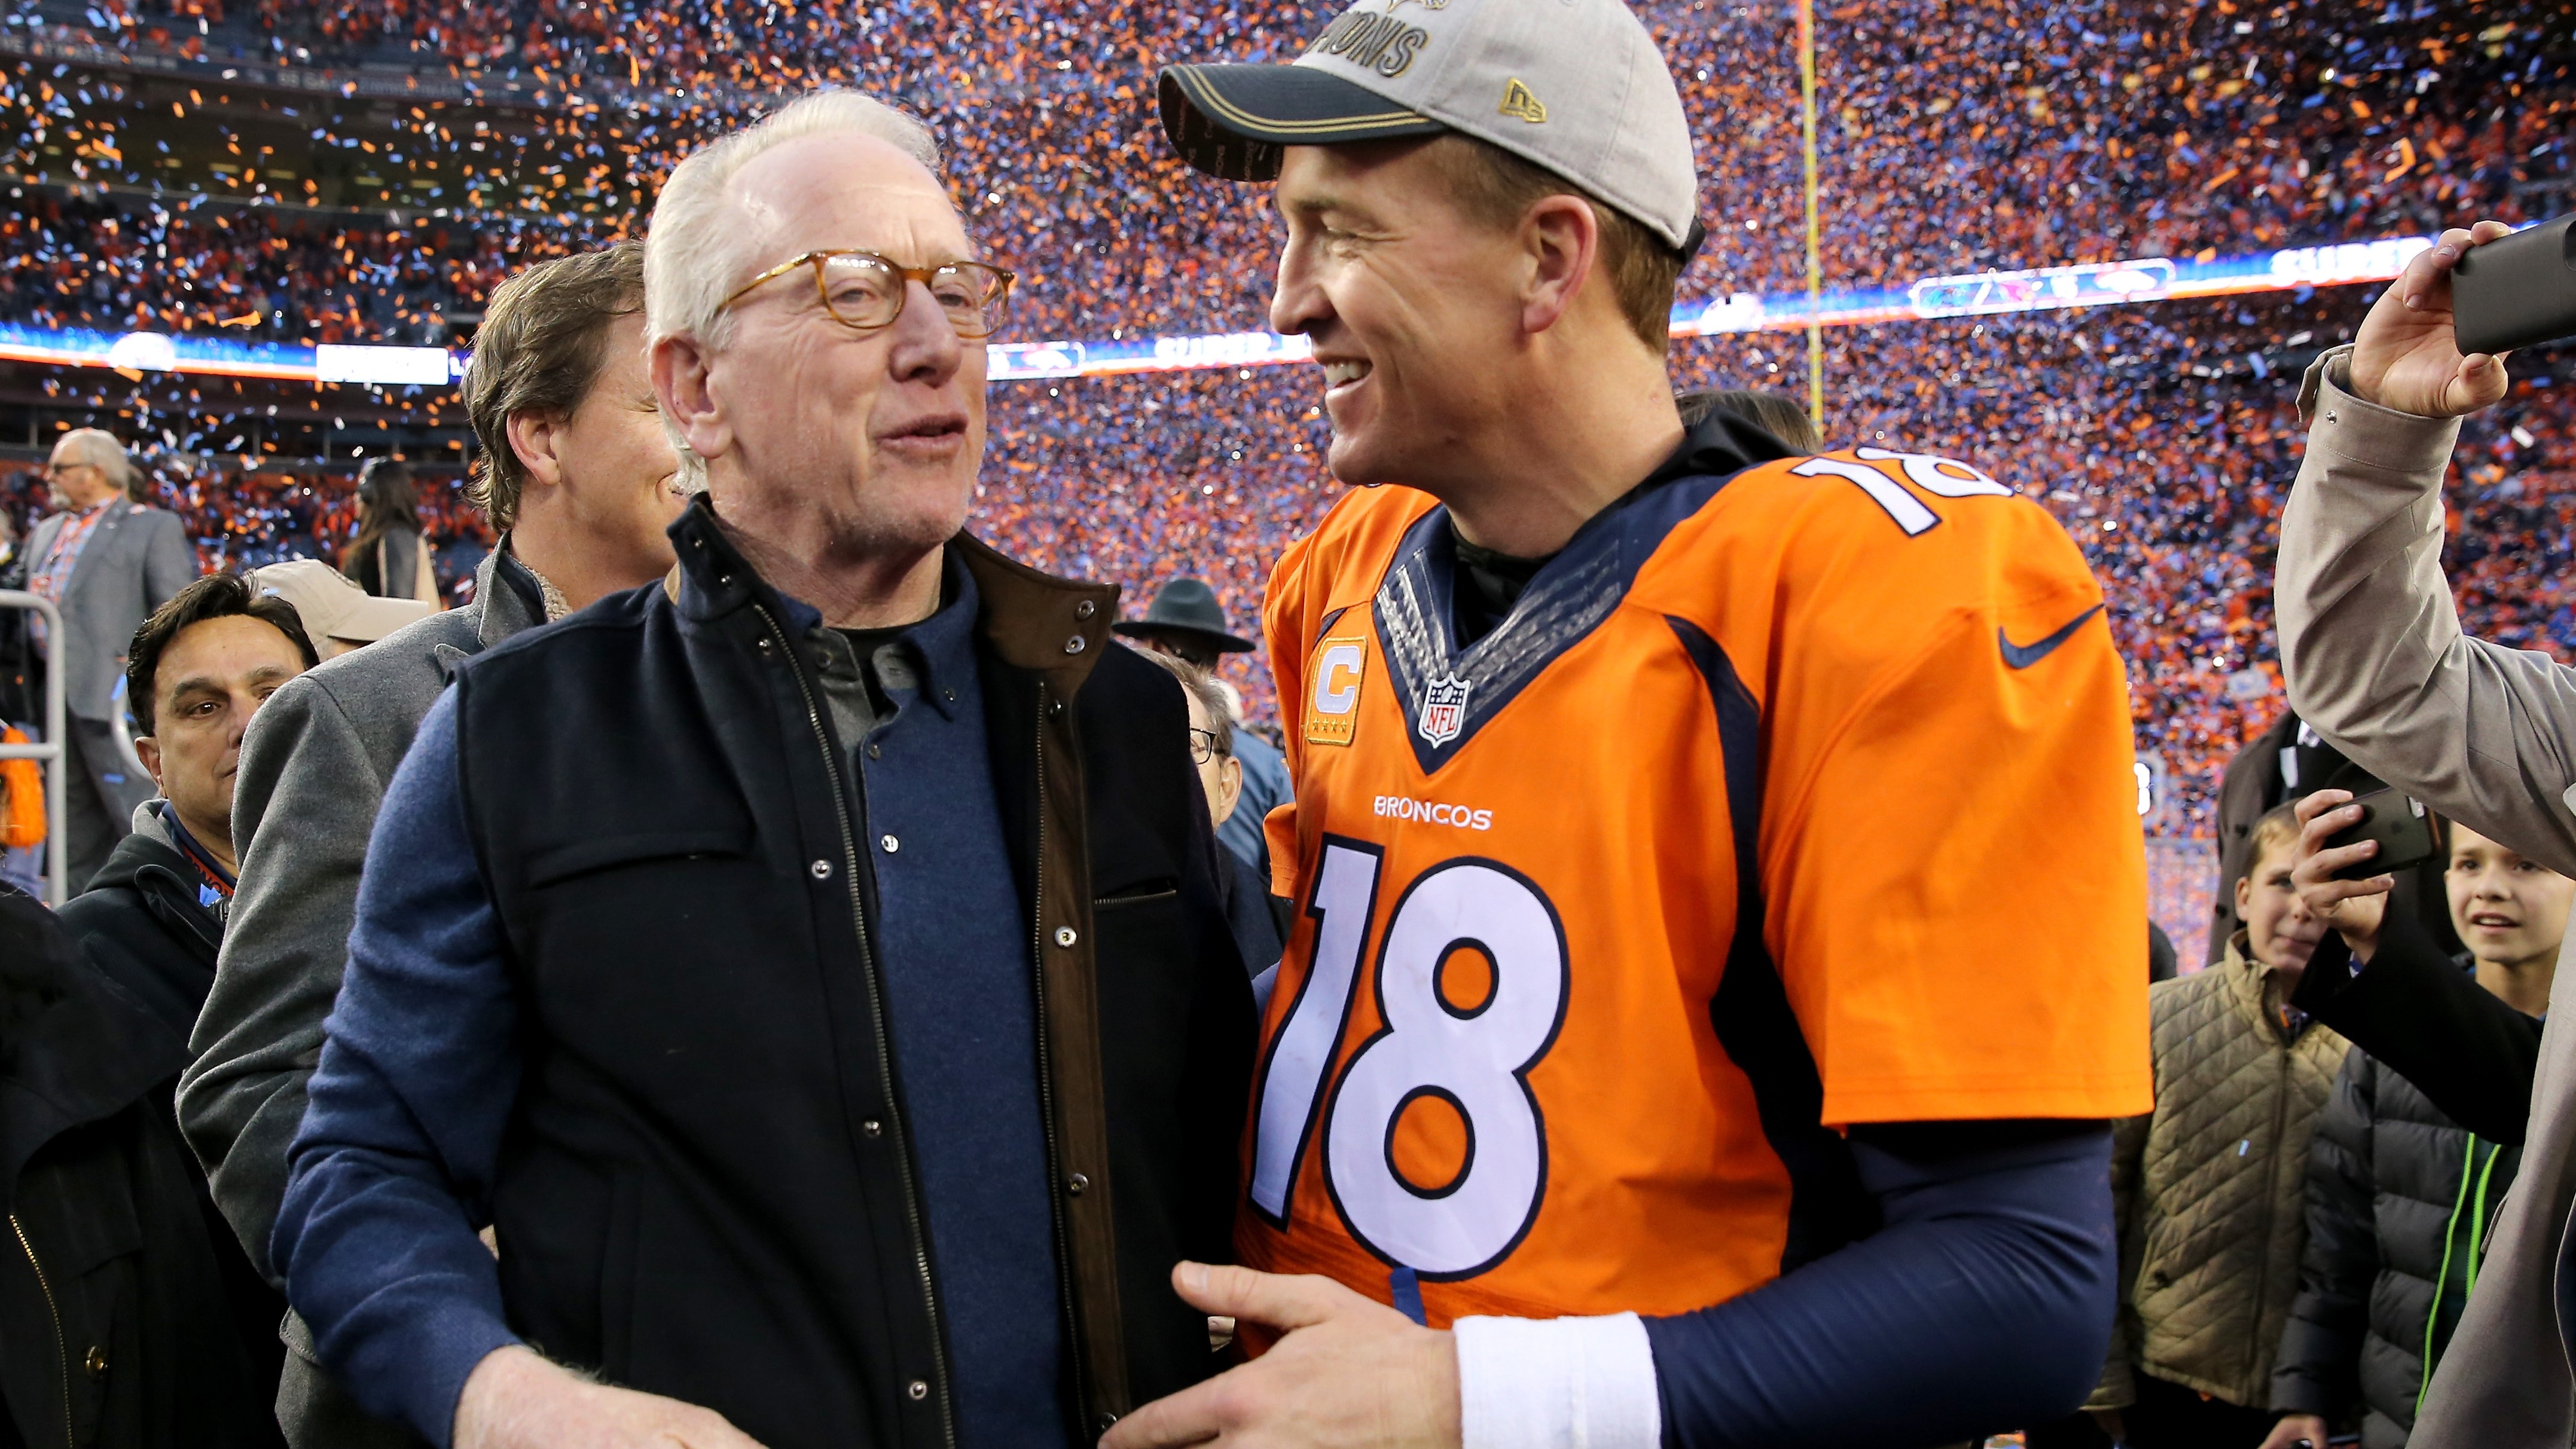 Archie Manning joins son Peyton in peddling pizza – The Denver Post